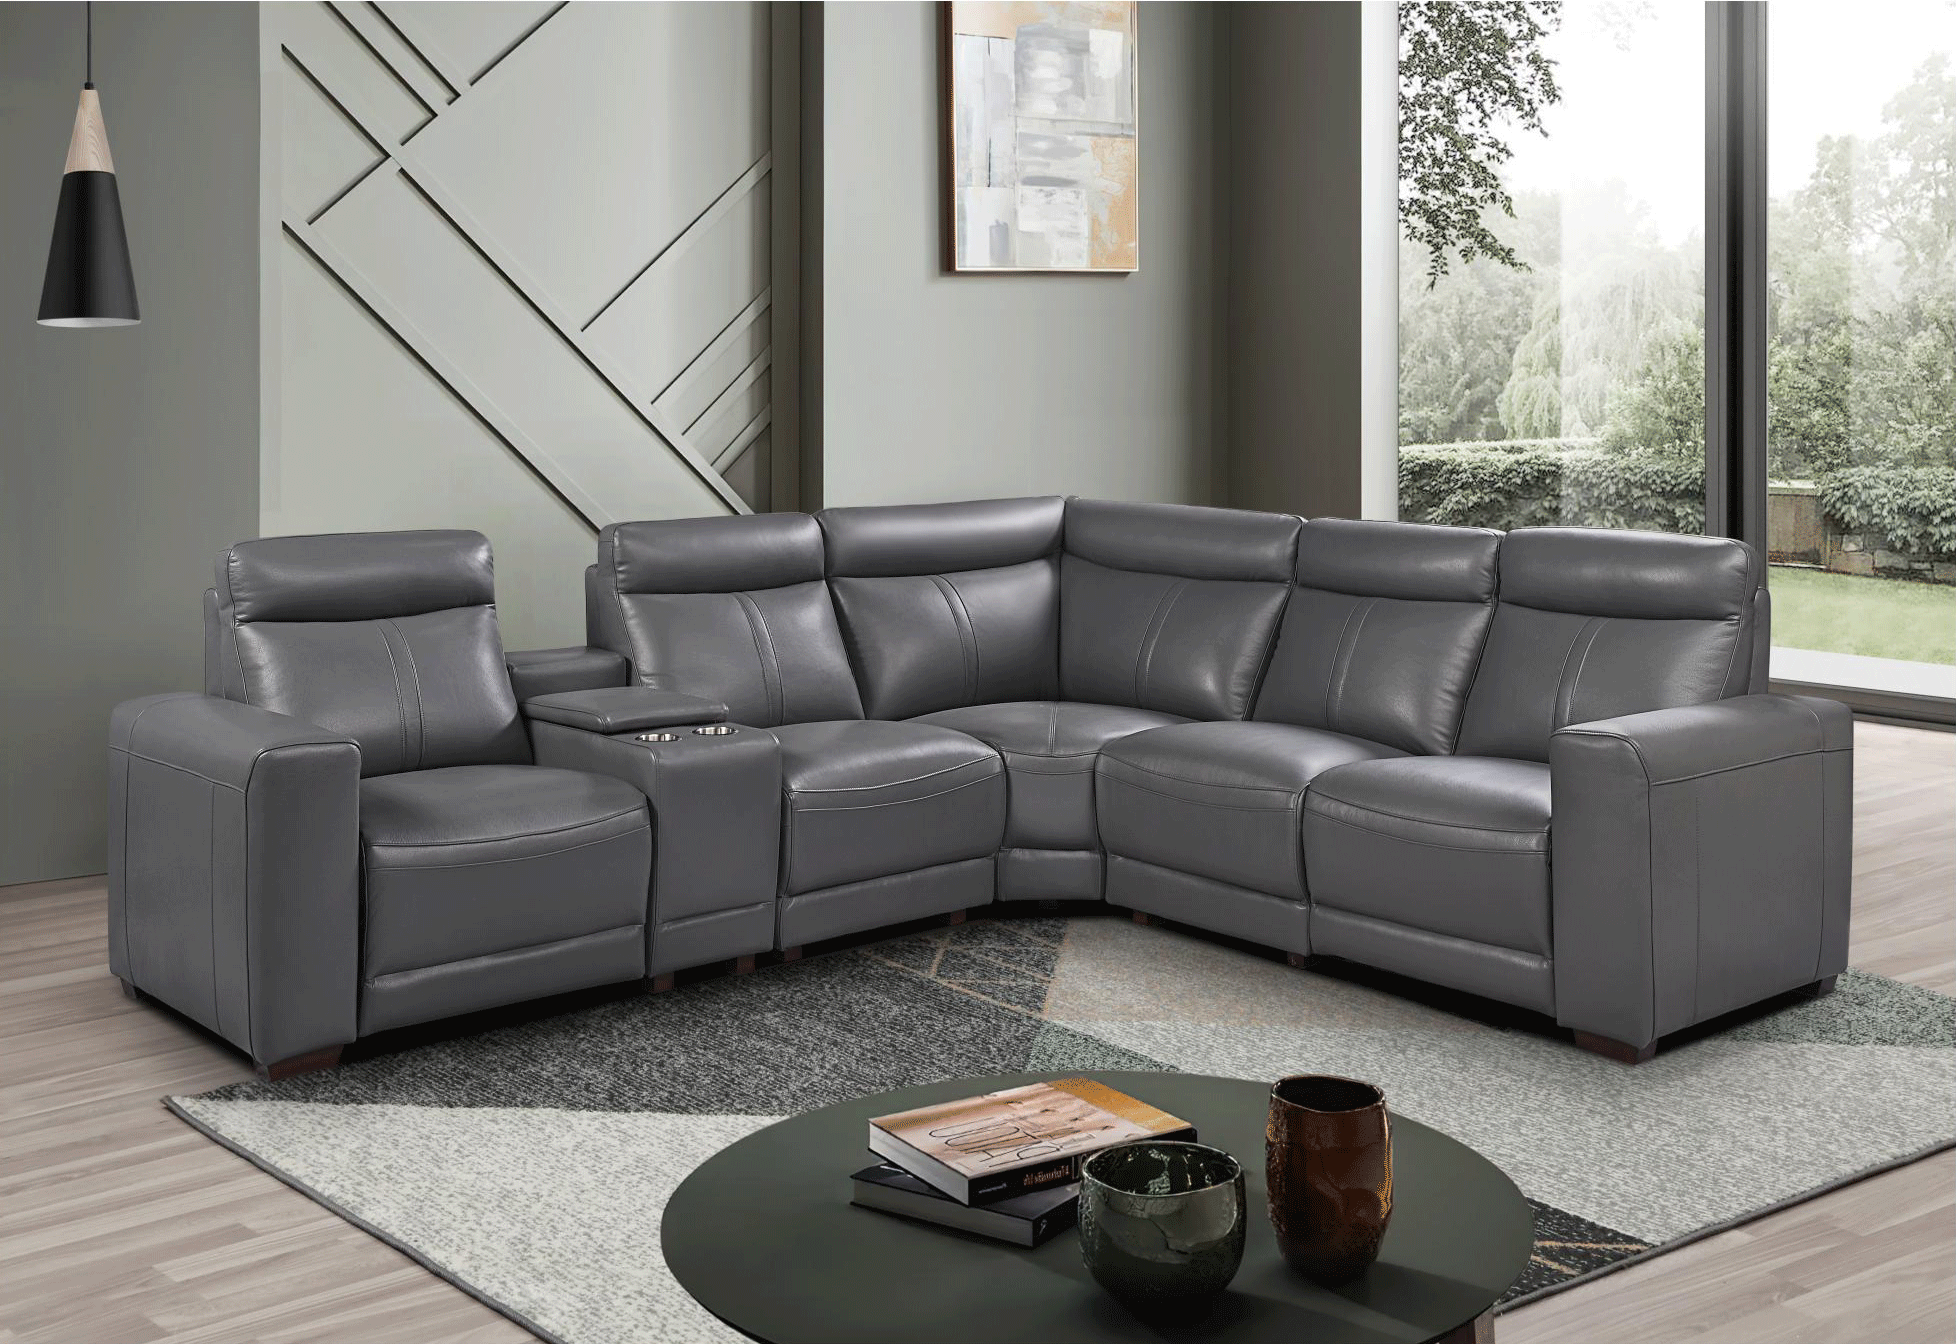 Brands Franco Gold 2777 Sectional w/ recliners